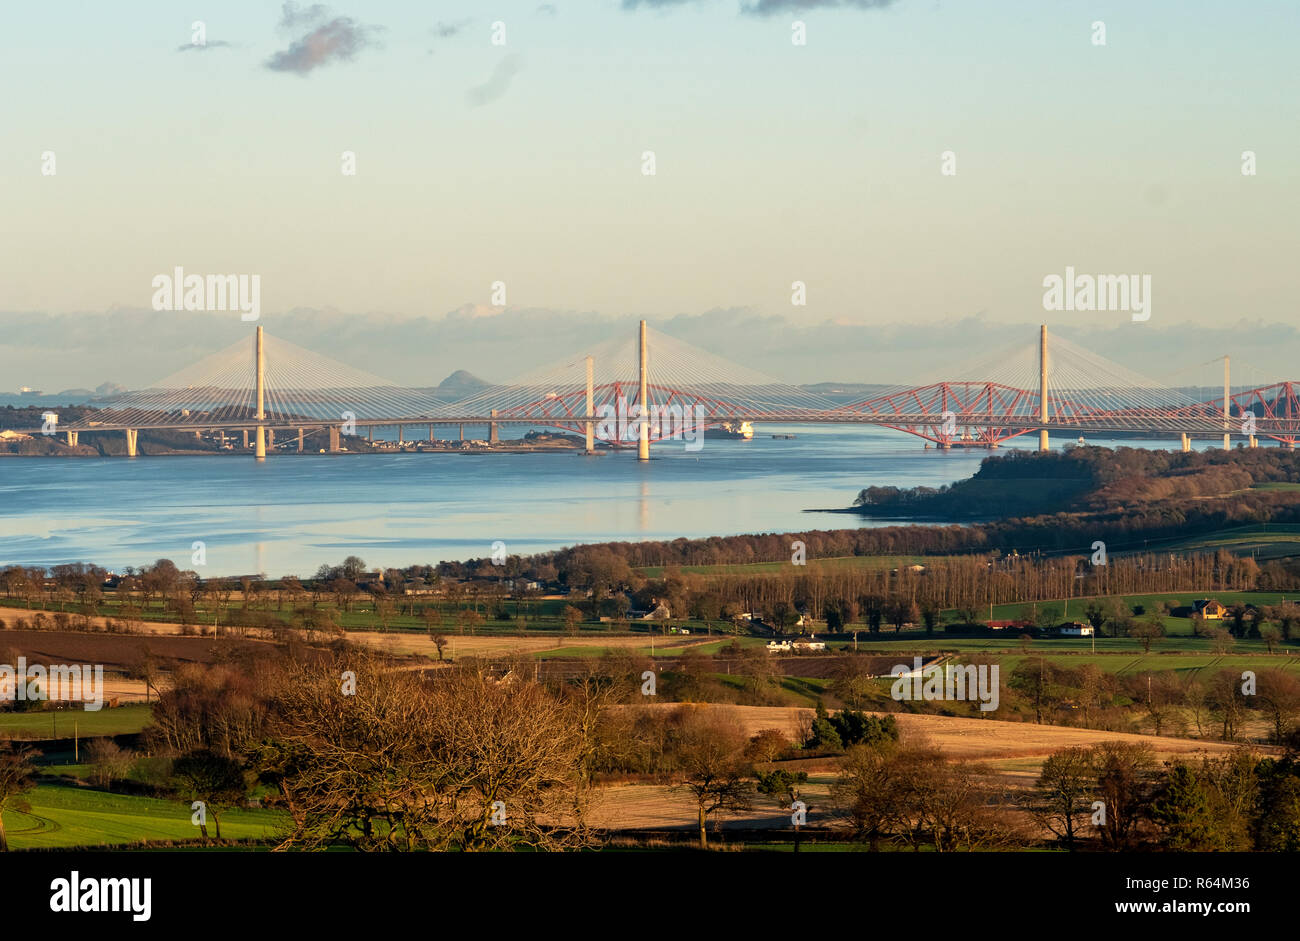 Three bridges, the Queensferry Crossing, Forth Road bridge, and Forth Rail Bridge spanning the Firth of Forth between North and South Queensferry. Stock Photo